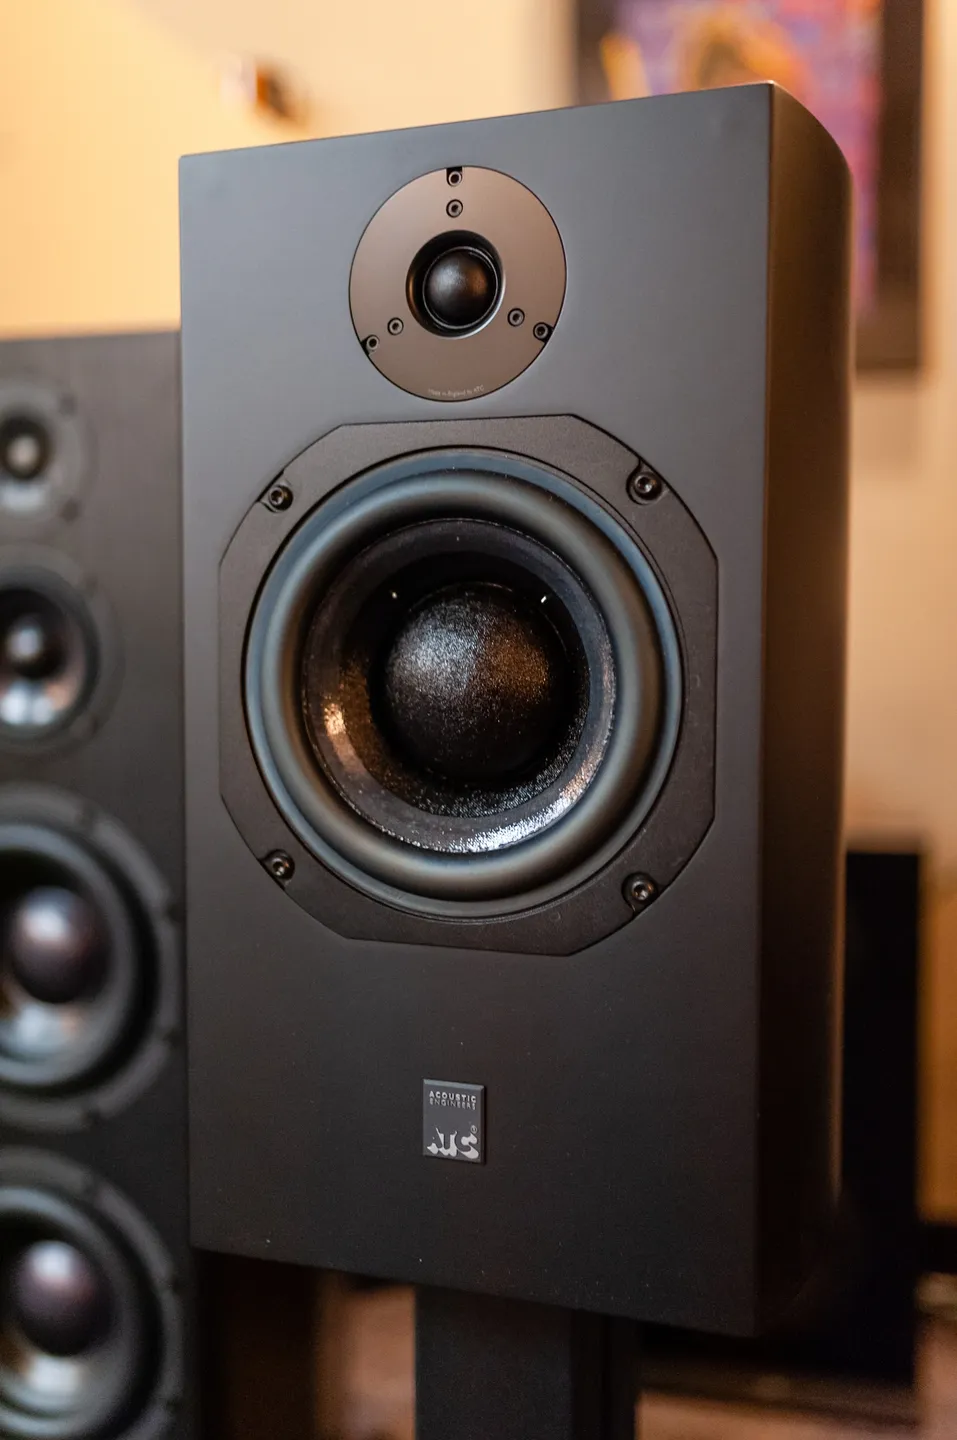 A close up of the front speakers of two speakers